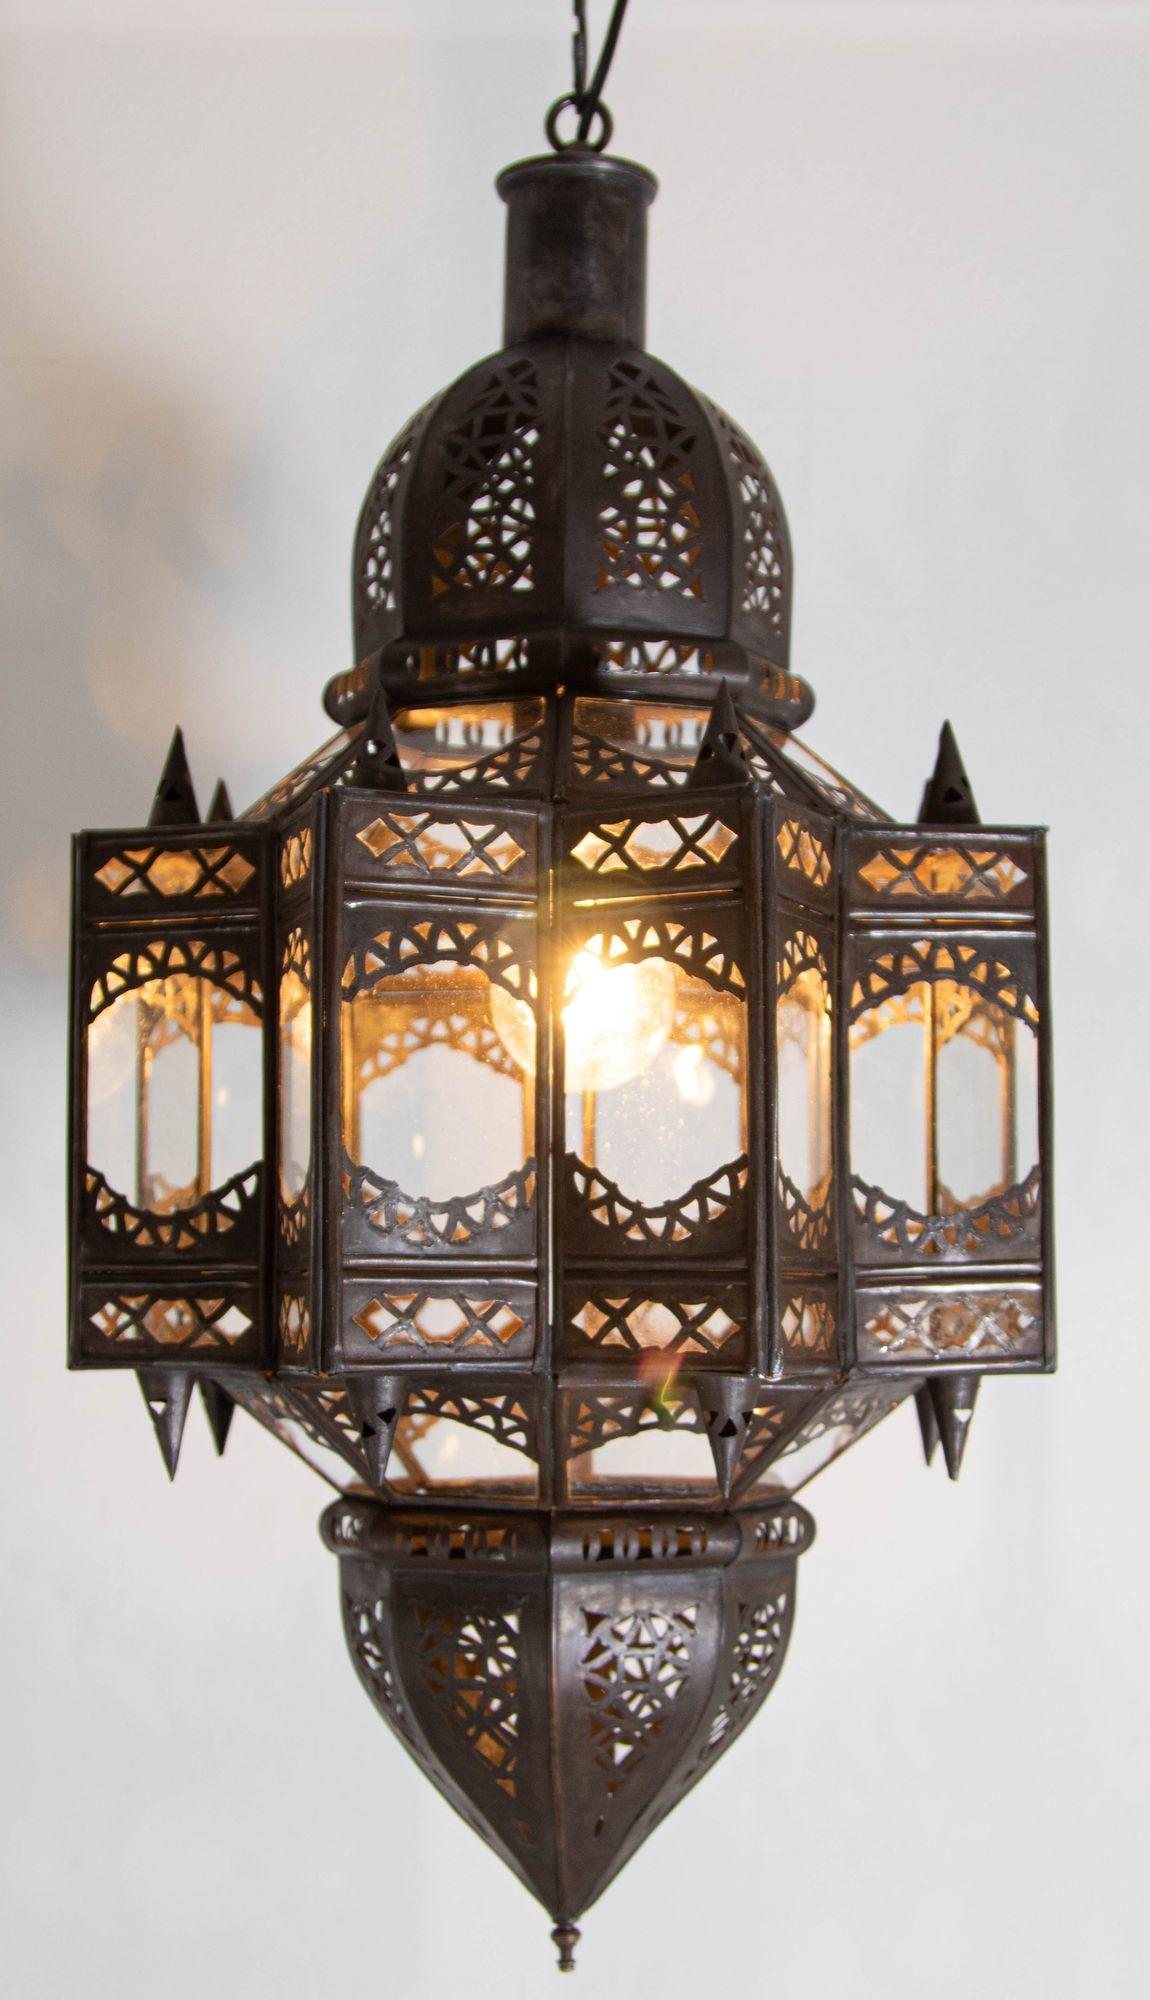 Vintage Moroccan Moorish star shape in clear glass and metal lantern.
Clear Glass star shape lantern pendant handcrafted by Moroccan skilled artisans in Marrakech.
The metal is hand-cut in floral and geometric Moorish Islamic designs.
The lantern is